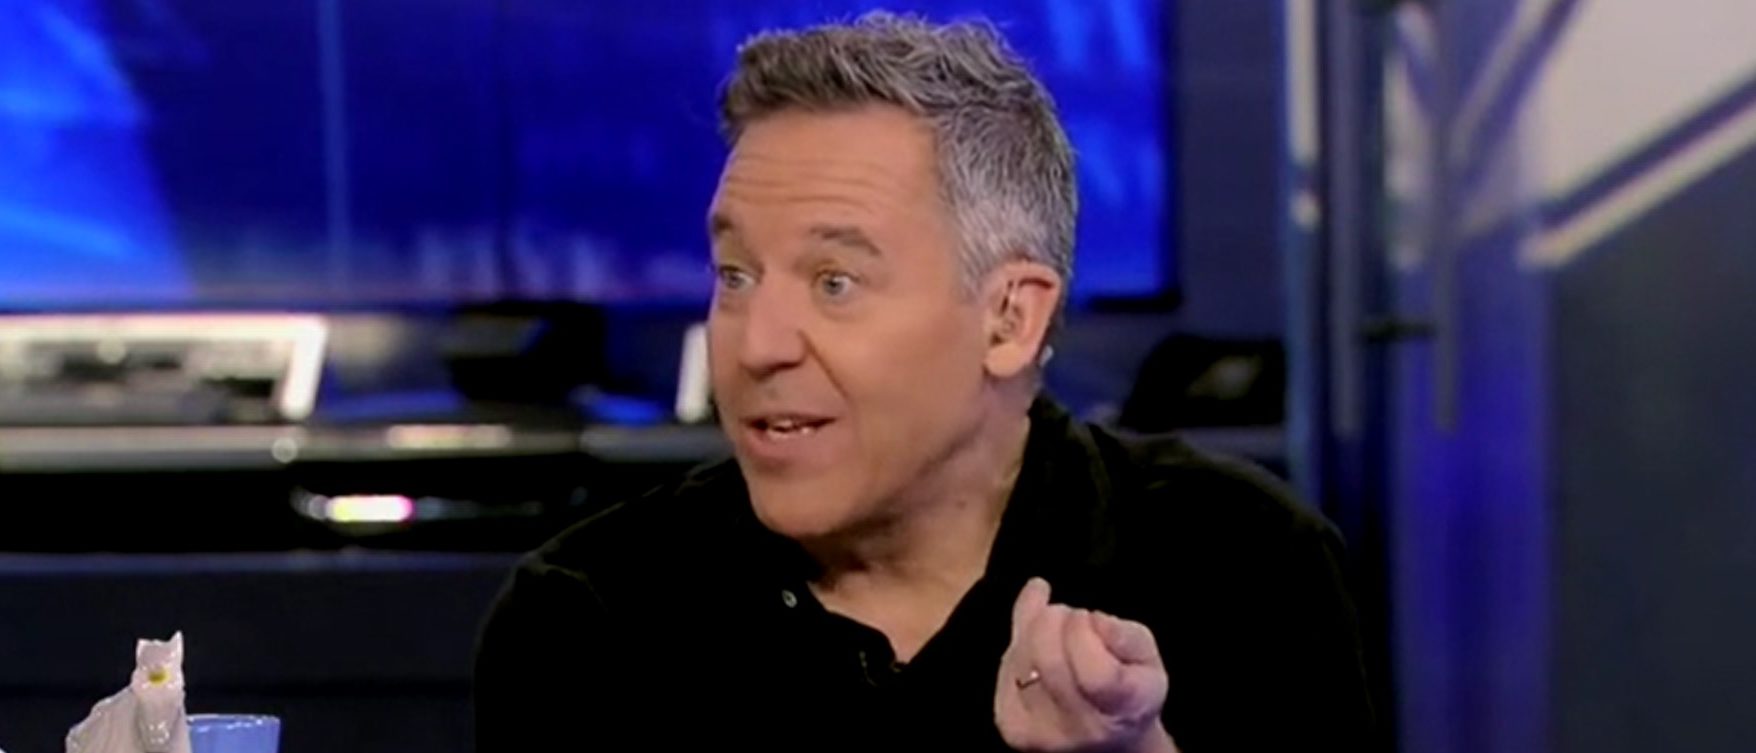 ‘There’s No Head On This Horseman’: Greg Gutfeld Mocks ‘Wokesters’ Who Have No Solutions When Things Droop Sideways